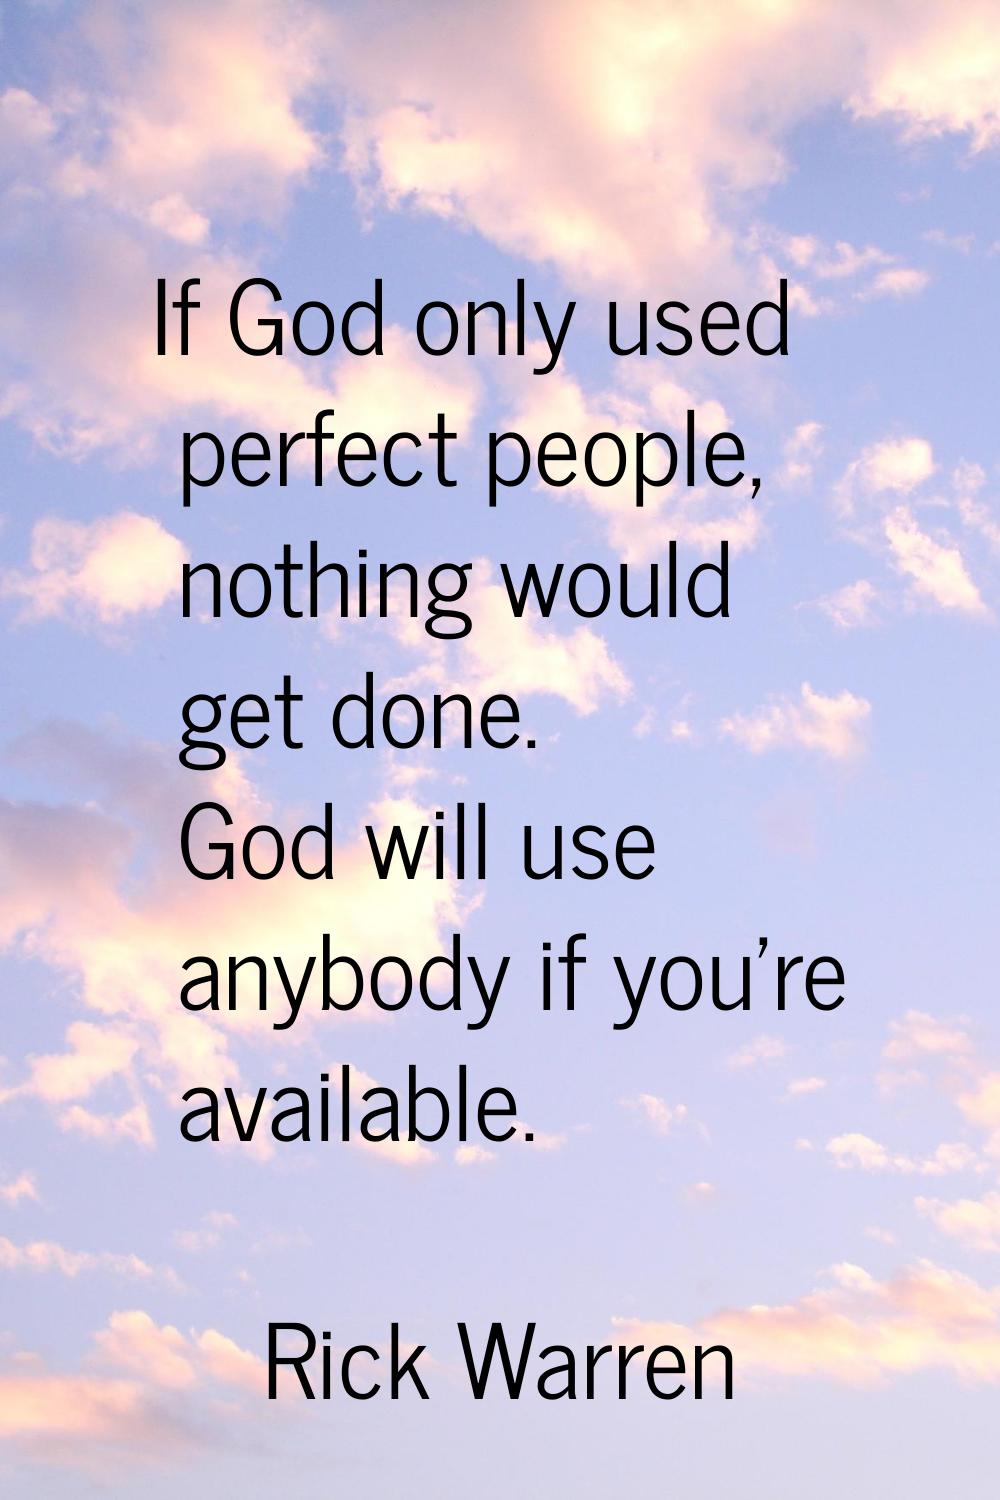 If God only used perfect people, nothing would get done. God will use anybody if you're available.